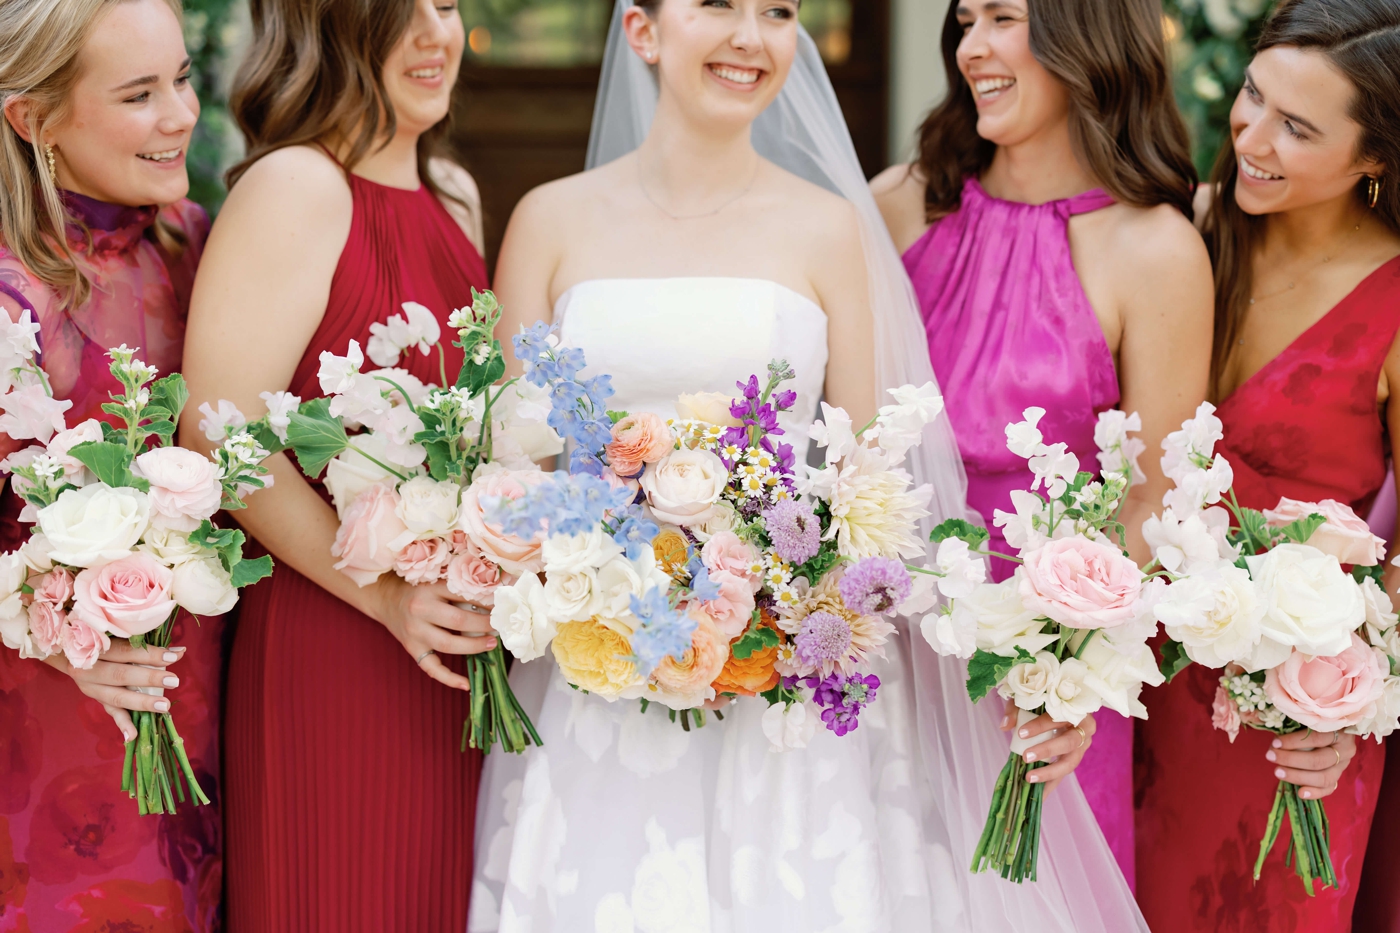 Pastel bridal and bridesmaids bouquet, with bridesmaids in bright pink and red dresses